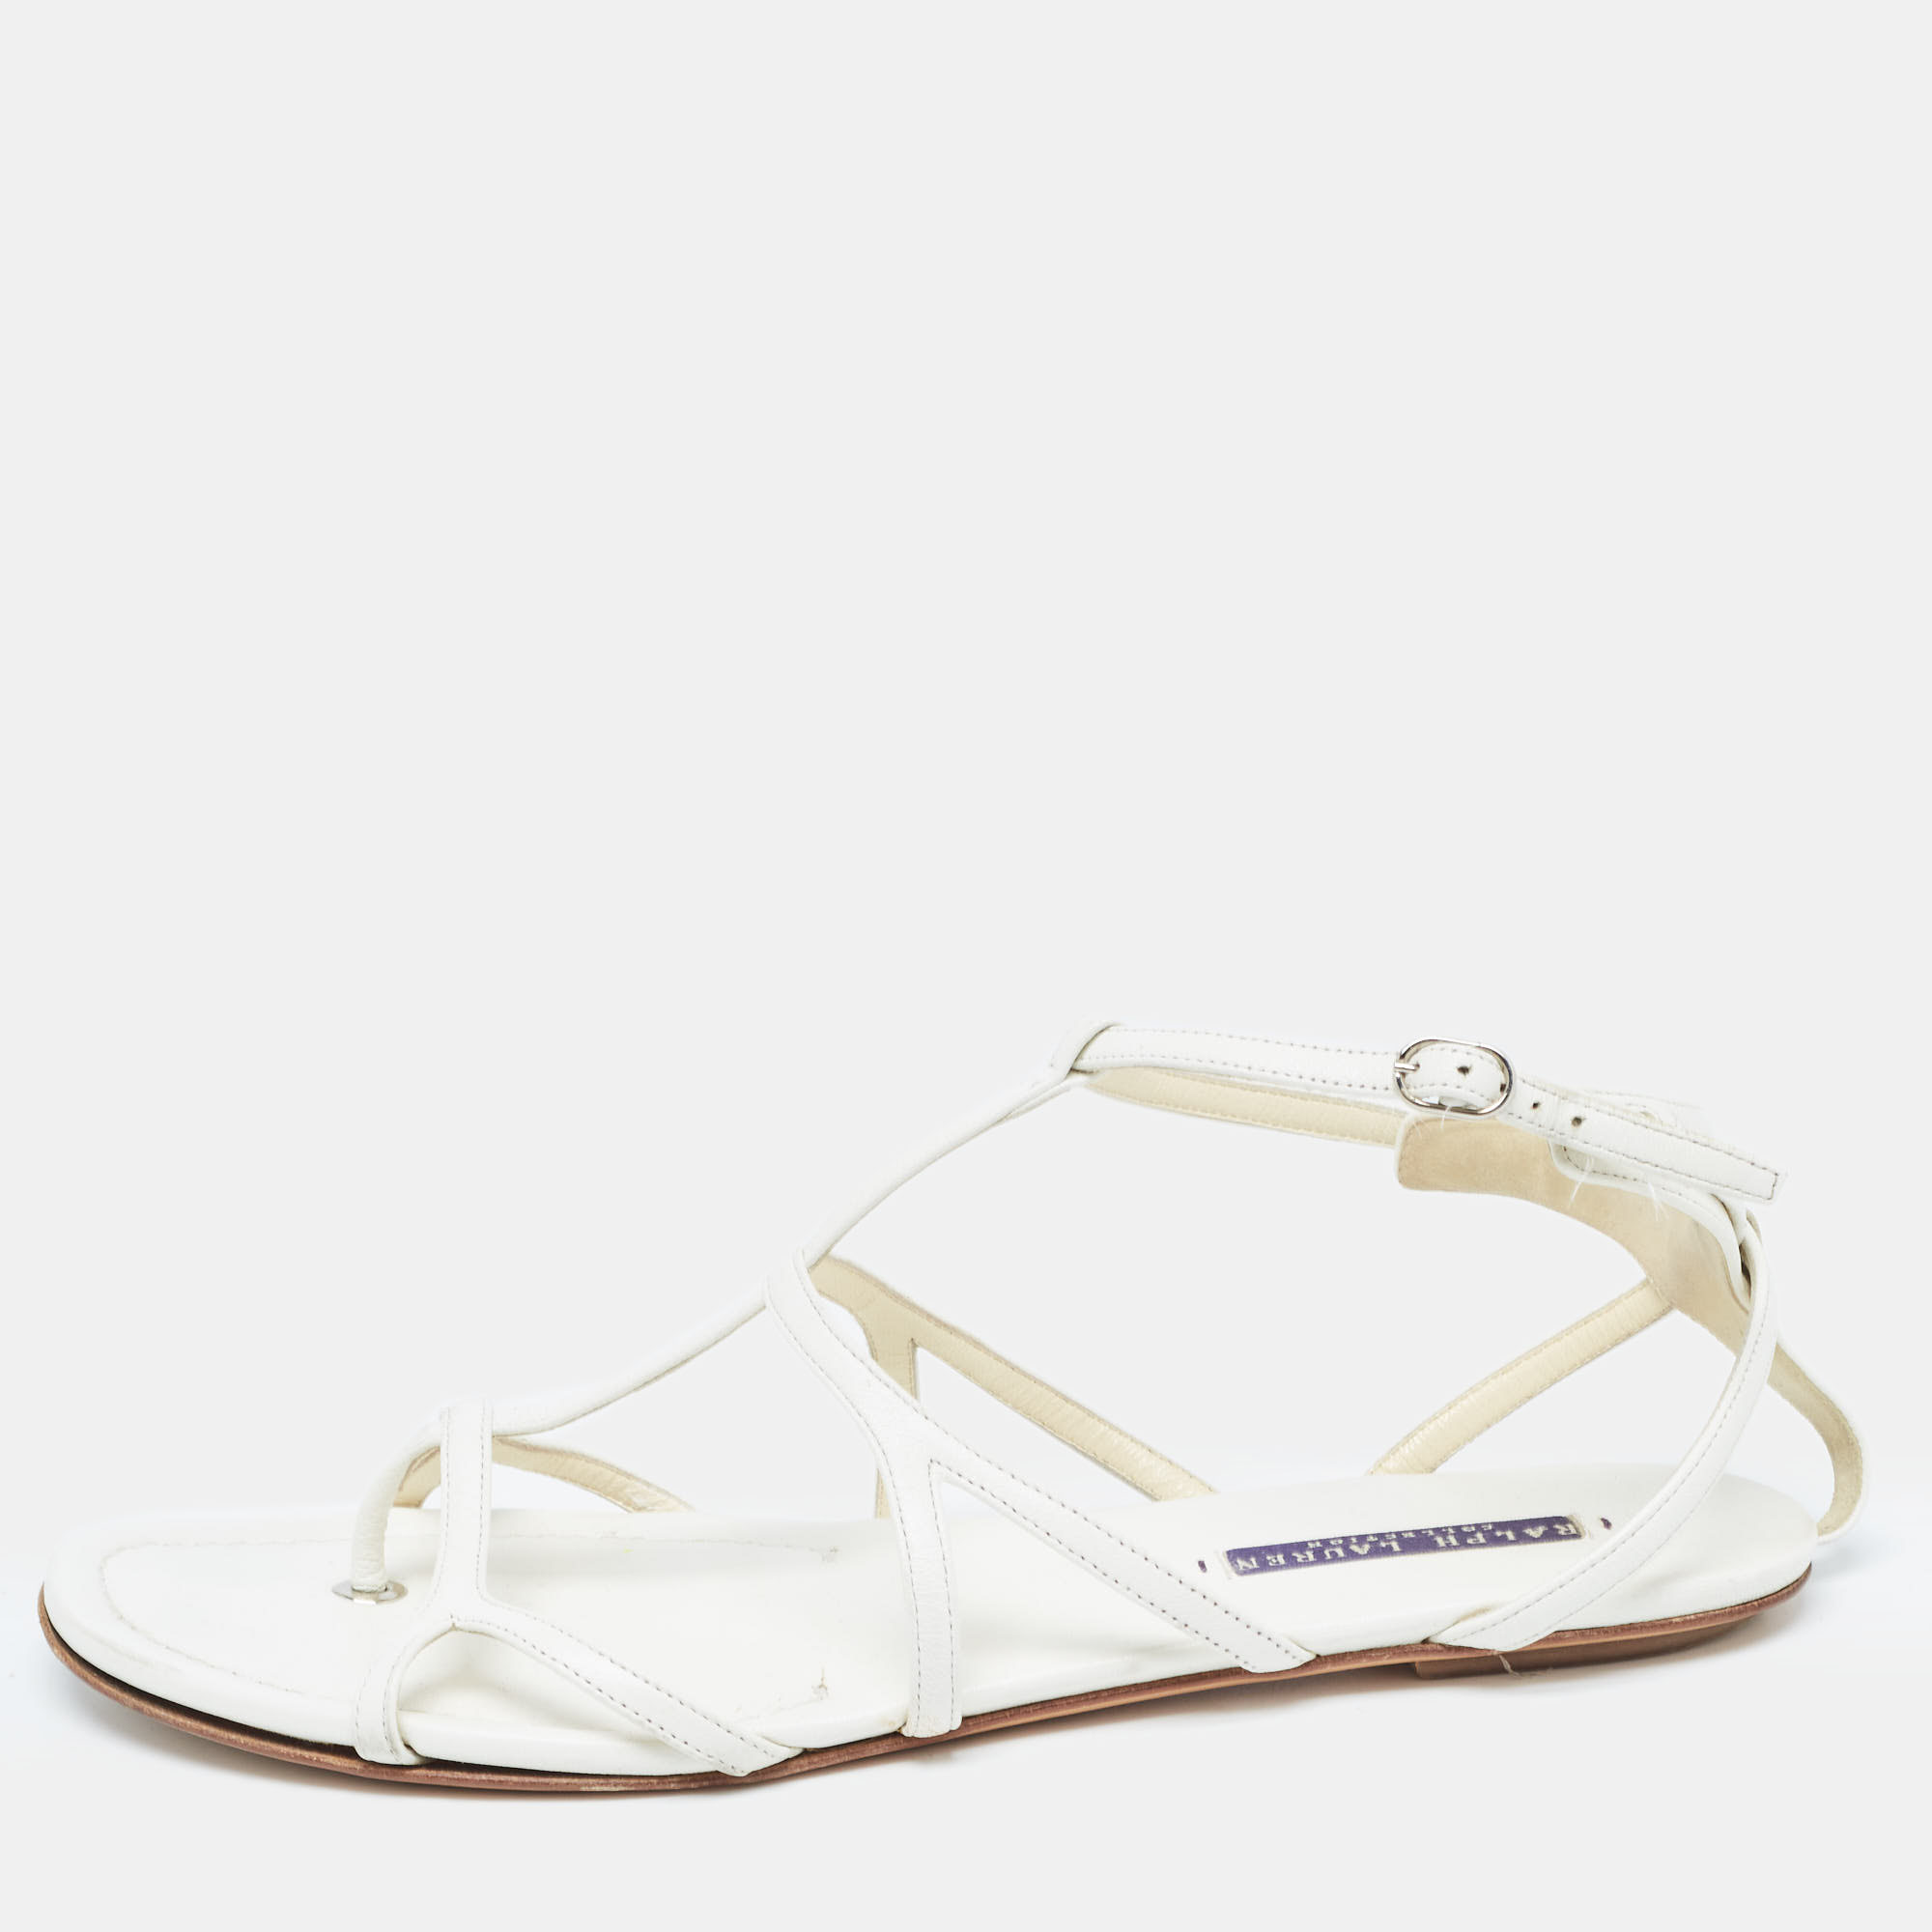 Pre-owned Ralph Lauren White Leather Thong Strappy Flat Sandals Size 41